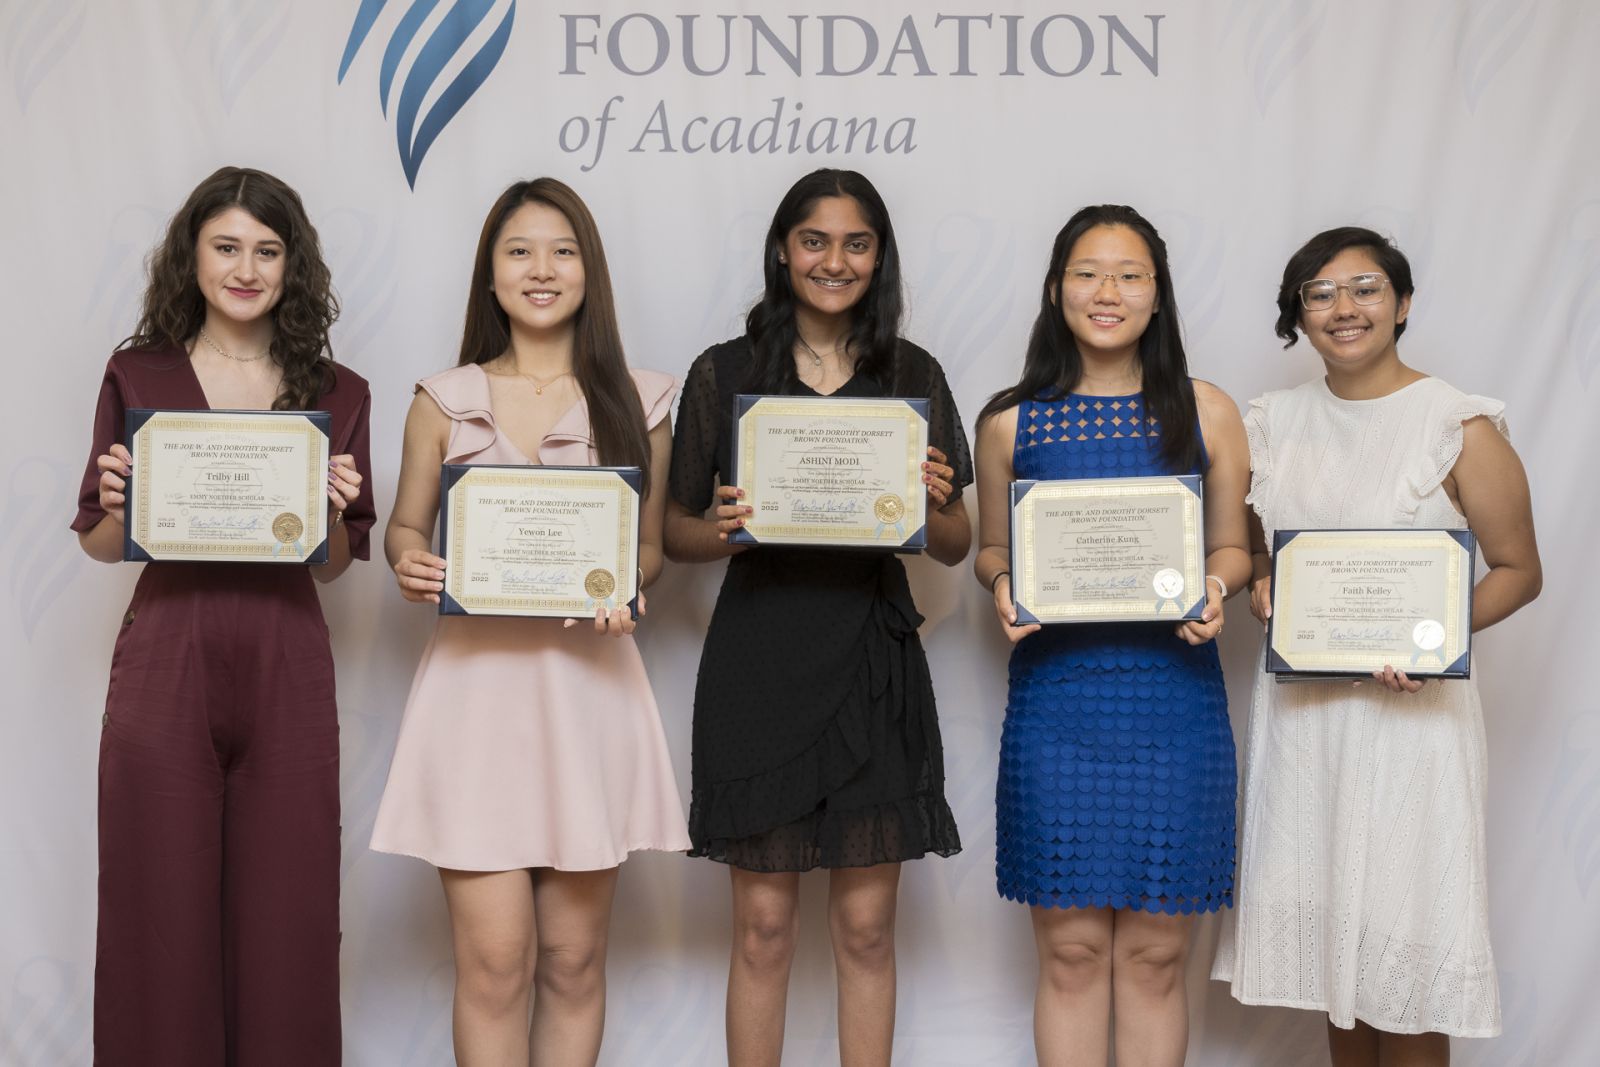 2022 Emmy Noether Scholars from L to R: Trilby Hill, Yewon Lee, Ashini Modi, Catherine Kung, Faith Kelley (Not pictured: Sanjana Mupparaju, Sara Pullen, Sadie Pullen, M. Claire Sykes, Anita Zahiri)